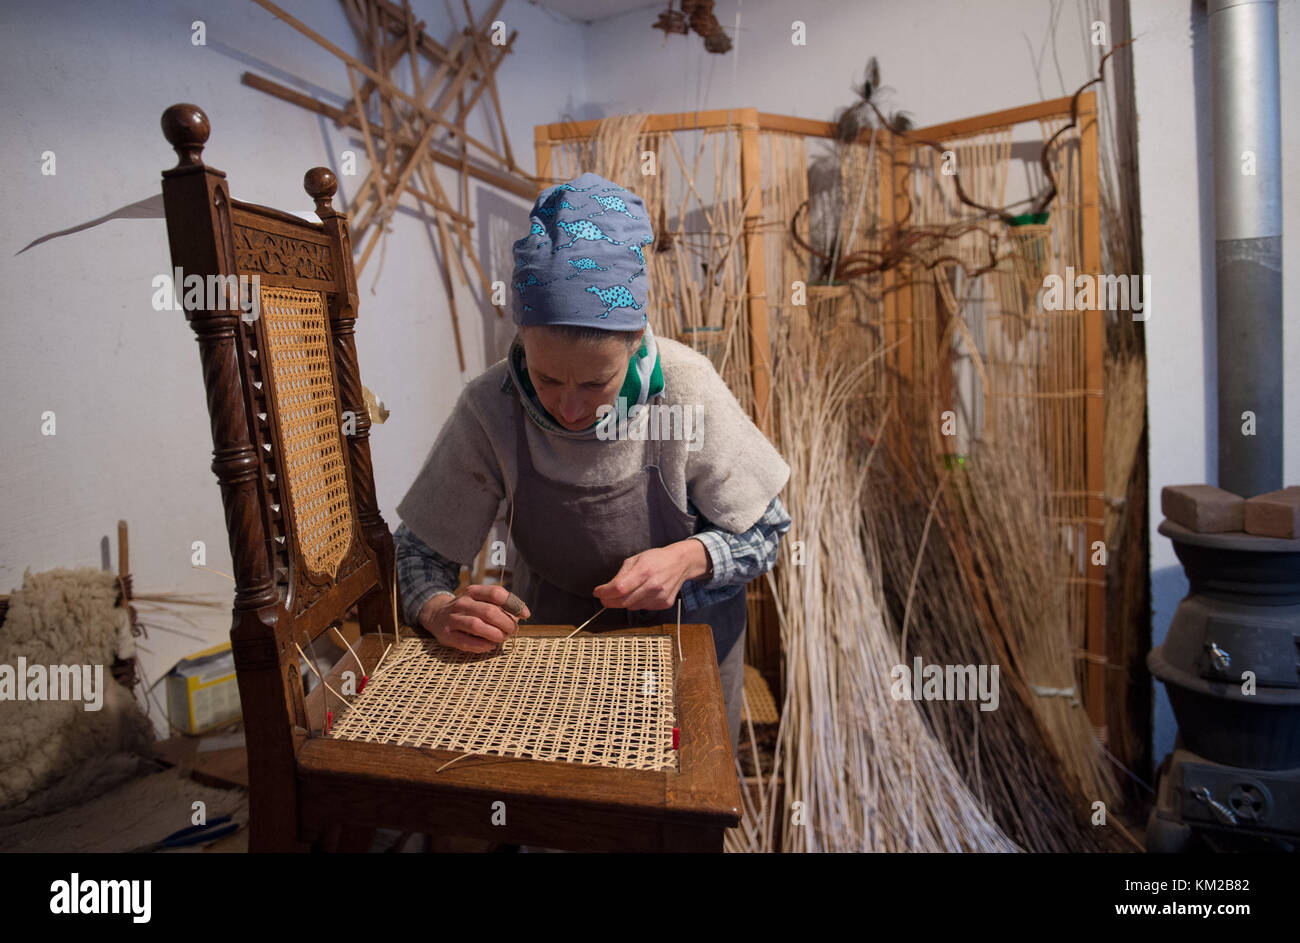 Mechernich, Germany. 02nd Dec, 2017. A basket maker working on the meshwork of an antique wooden chair in the LVR Freilichtmuseum Kommern ('LVR Open Air Museum Kommern') in Mechernich, Germany, 02 December 2017. The museum held its 'Advent for all senses' event on the first weekend of Advent, where visitors can observe the creation of traditional handcrafts. Credit: Rainer Jensen/dpa/Alamy Live News Stock Photo